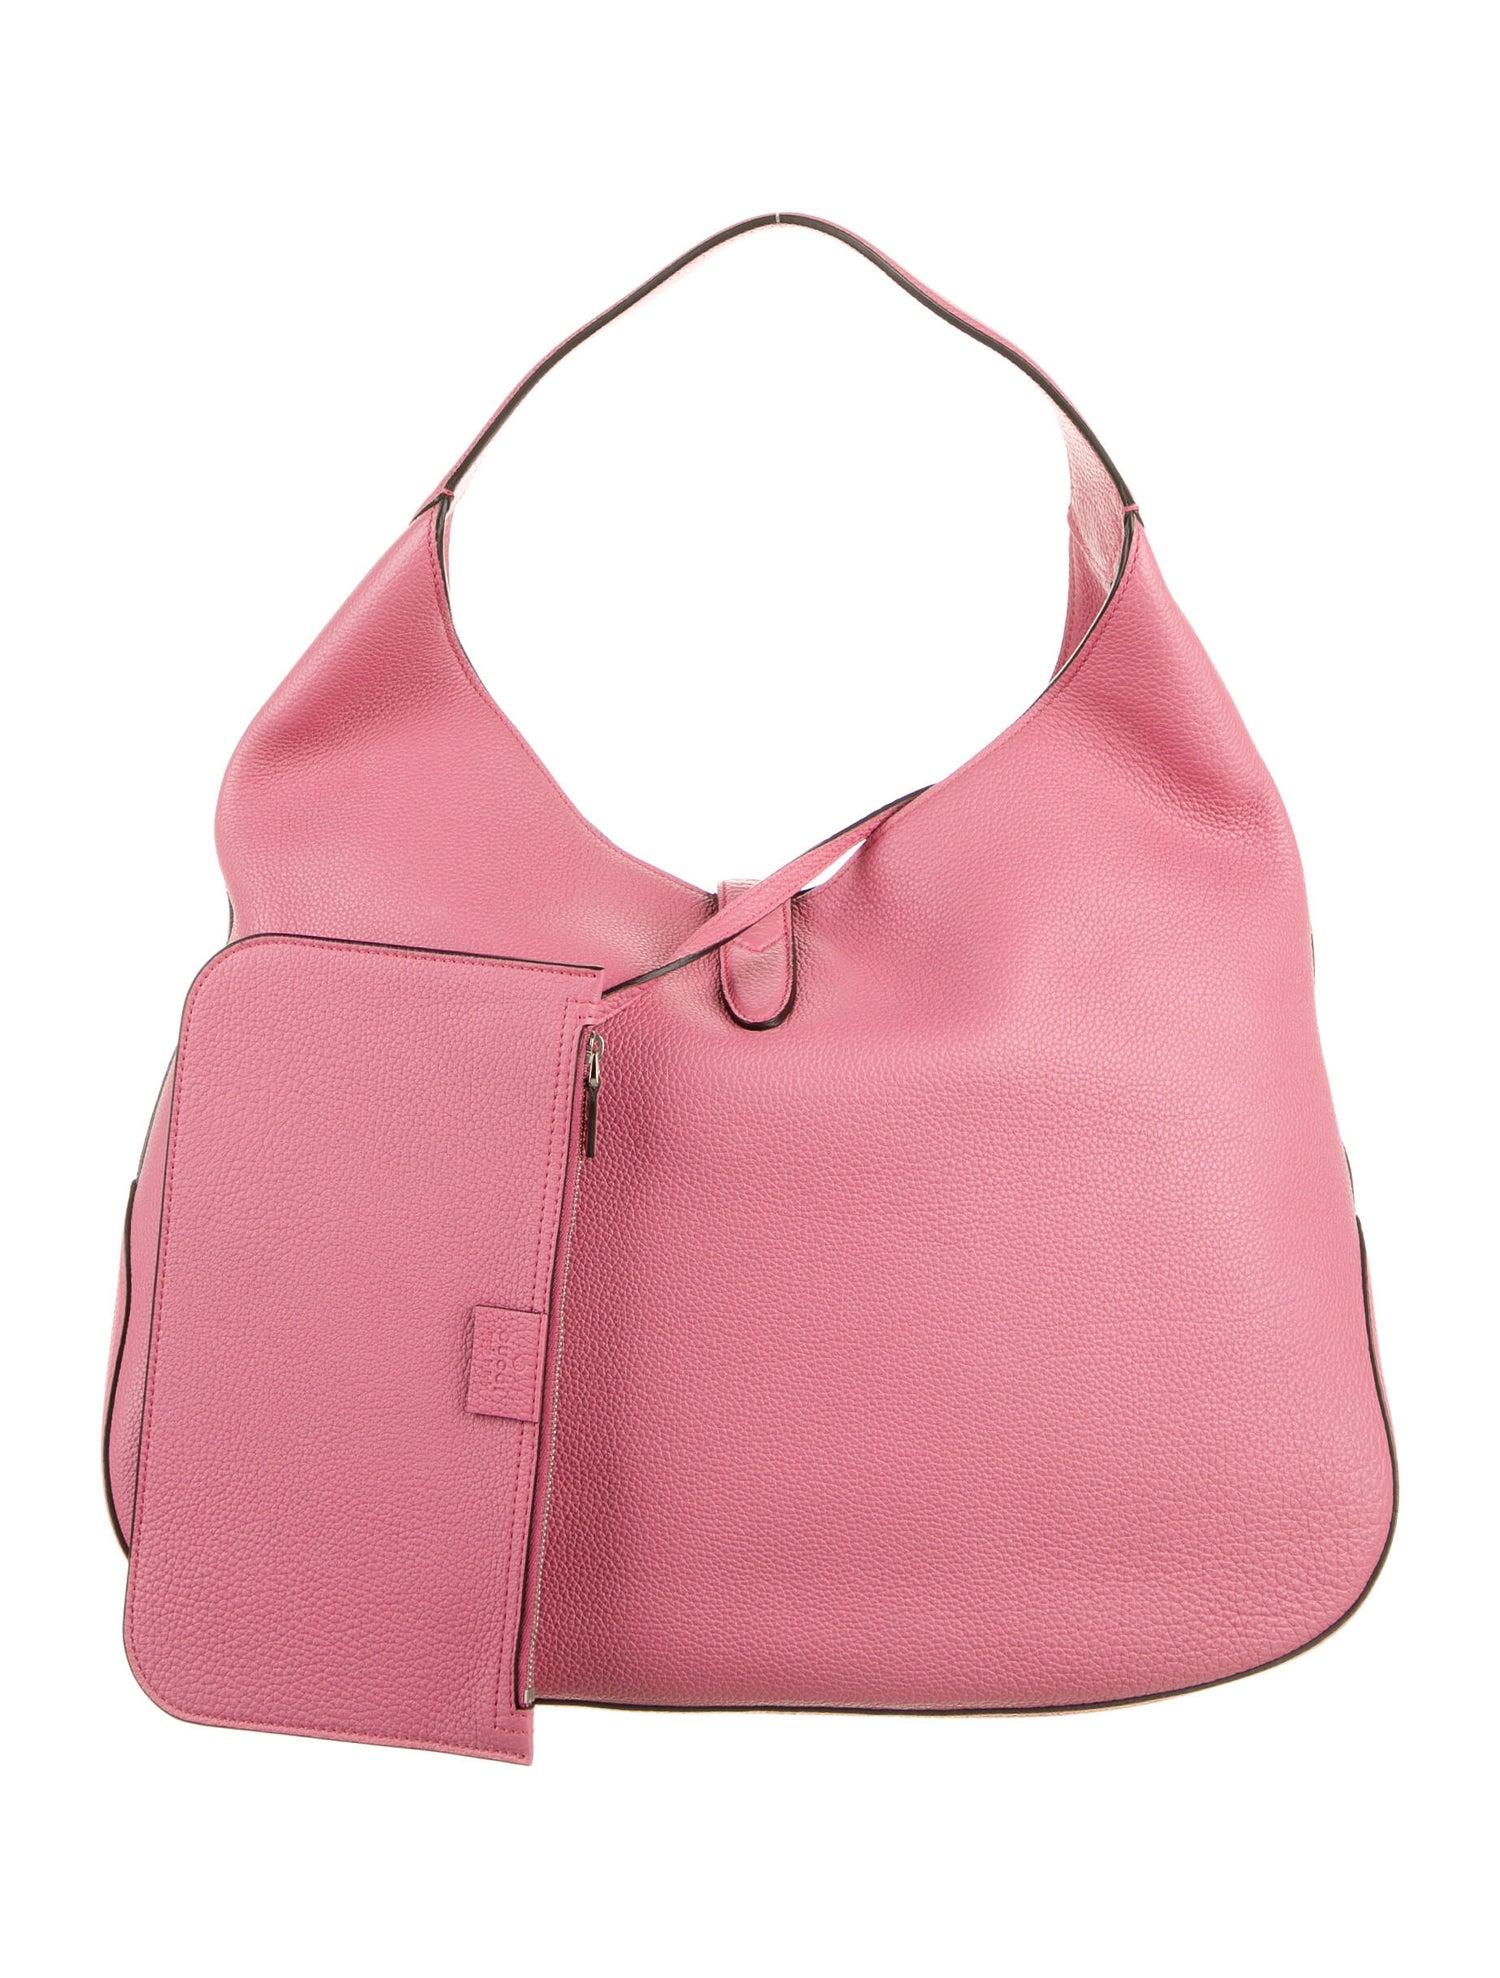 Women's New With Tags Gucci Extra Large Pink Leather Jackie O Runway Bag $3595 Fall 2014